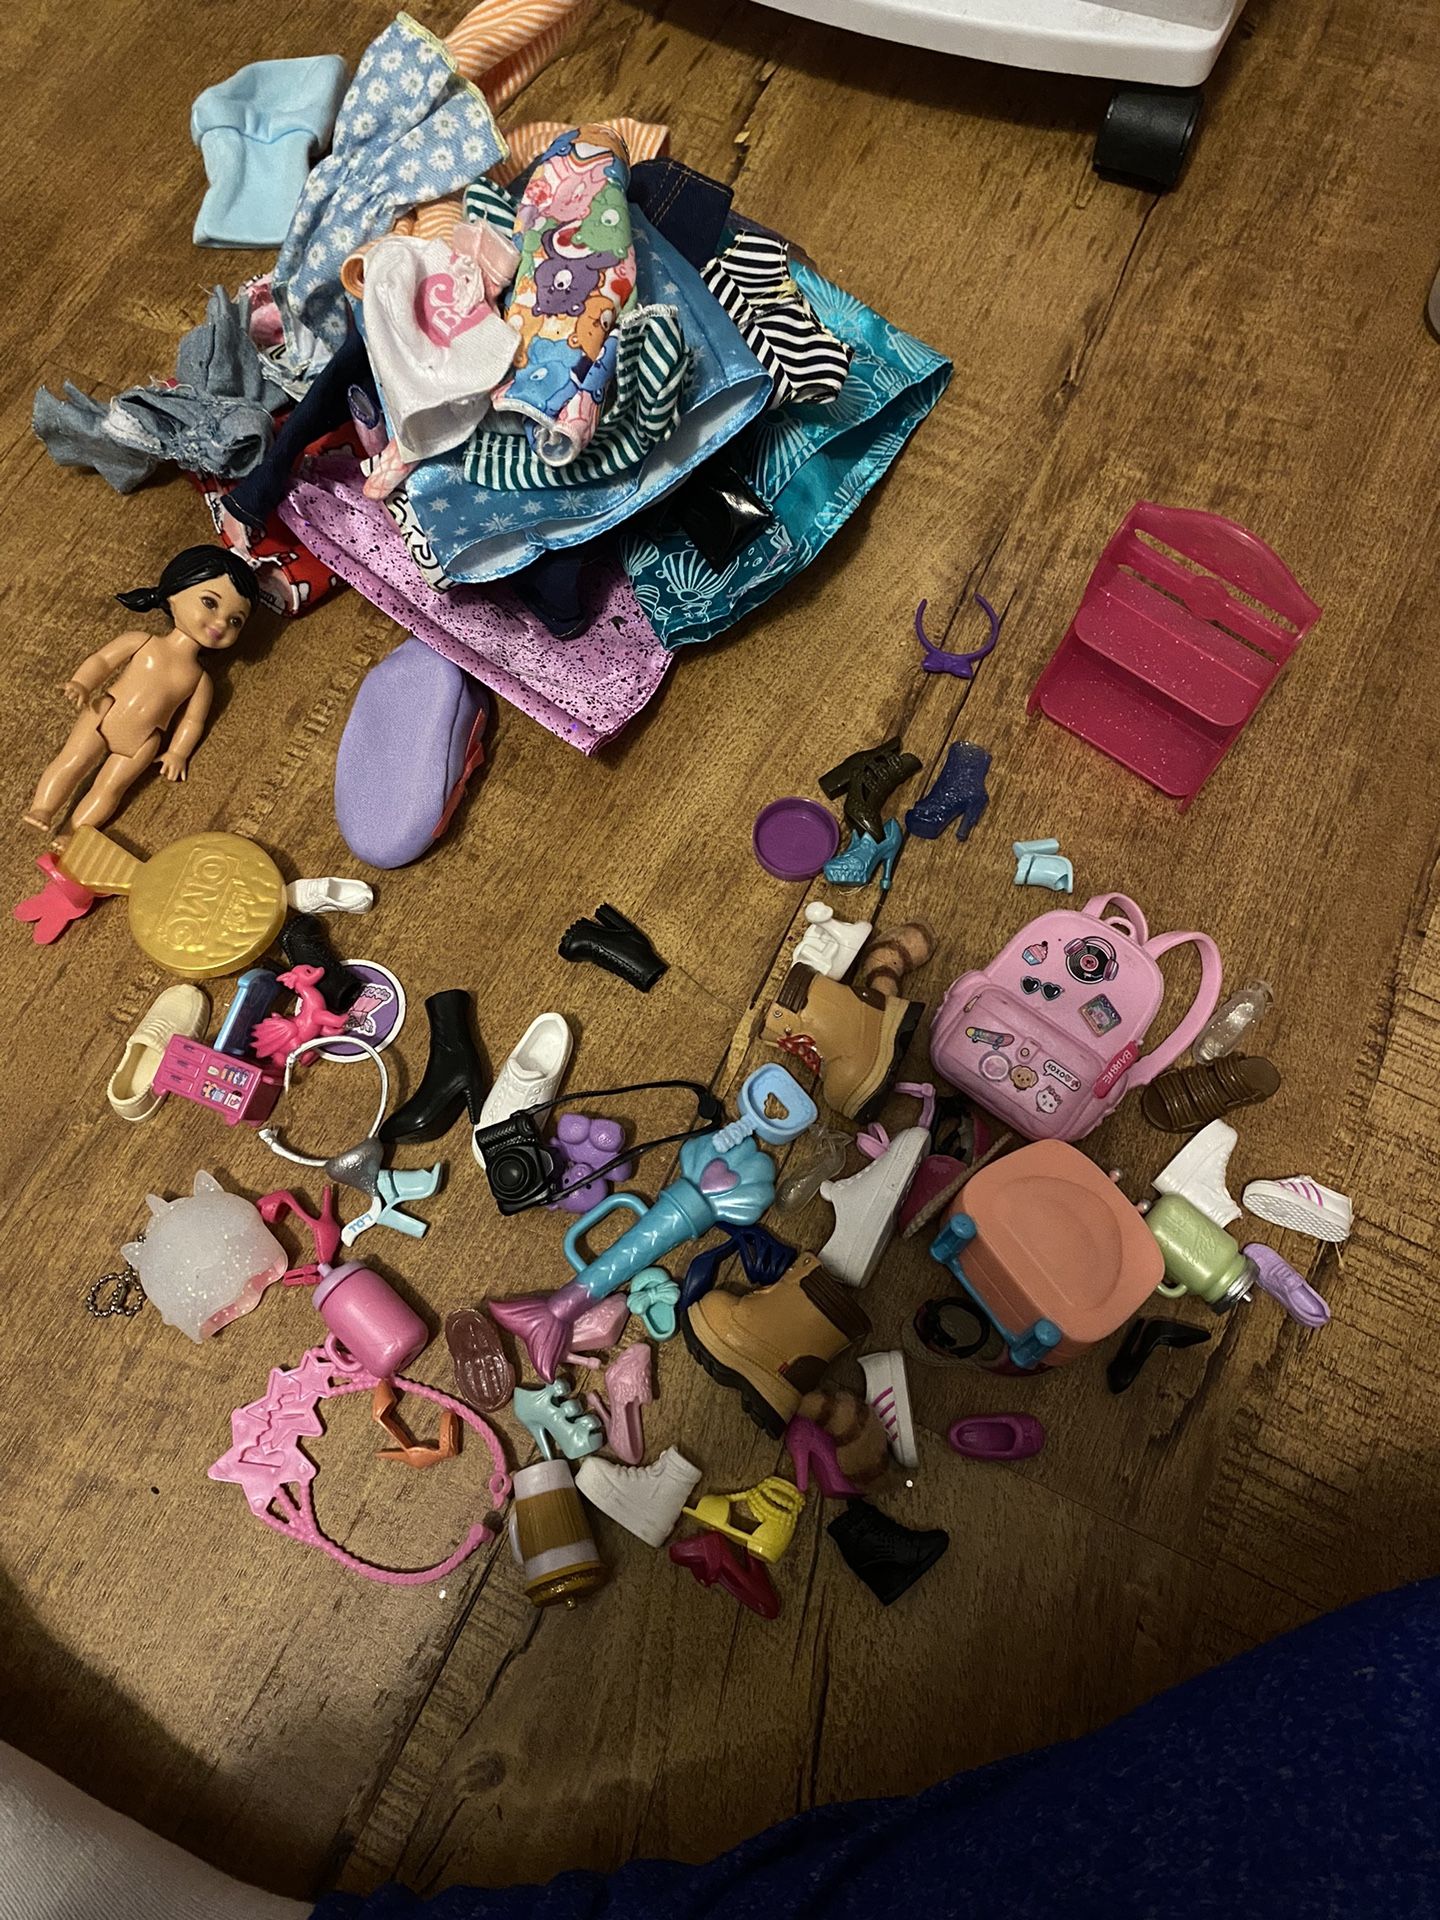 Barbie Accessories And Clothes 